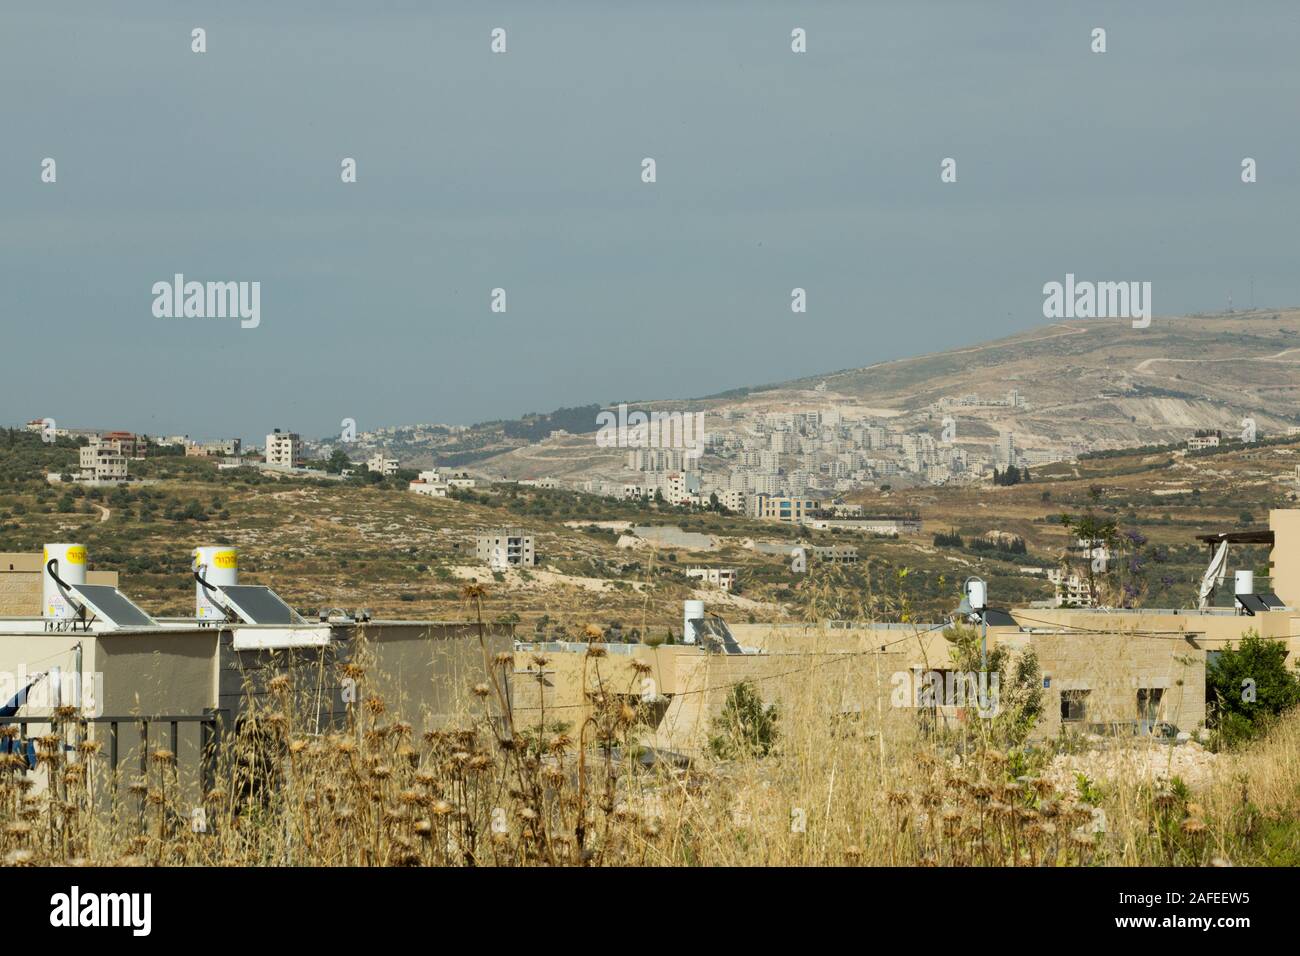 View of Nablus from the Israeli settlement Kdumim in the West Bank, Israel / Palestine Stock Photo